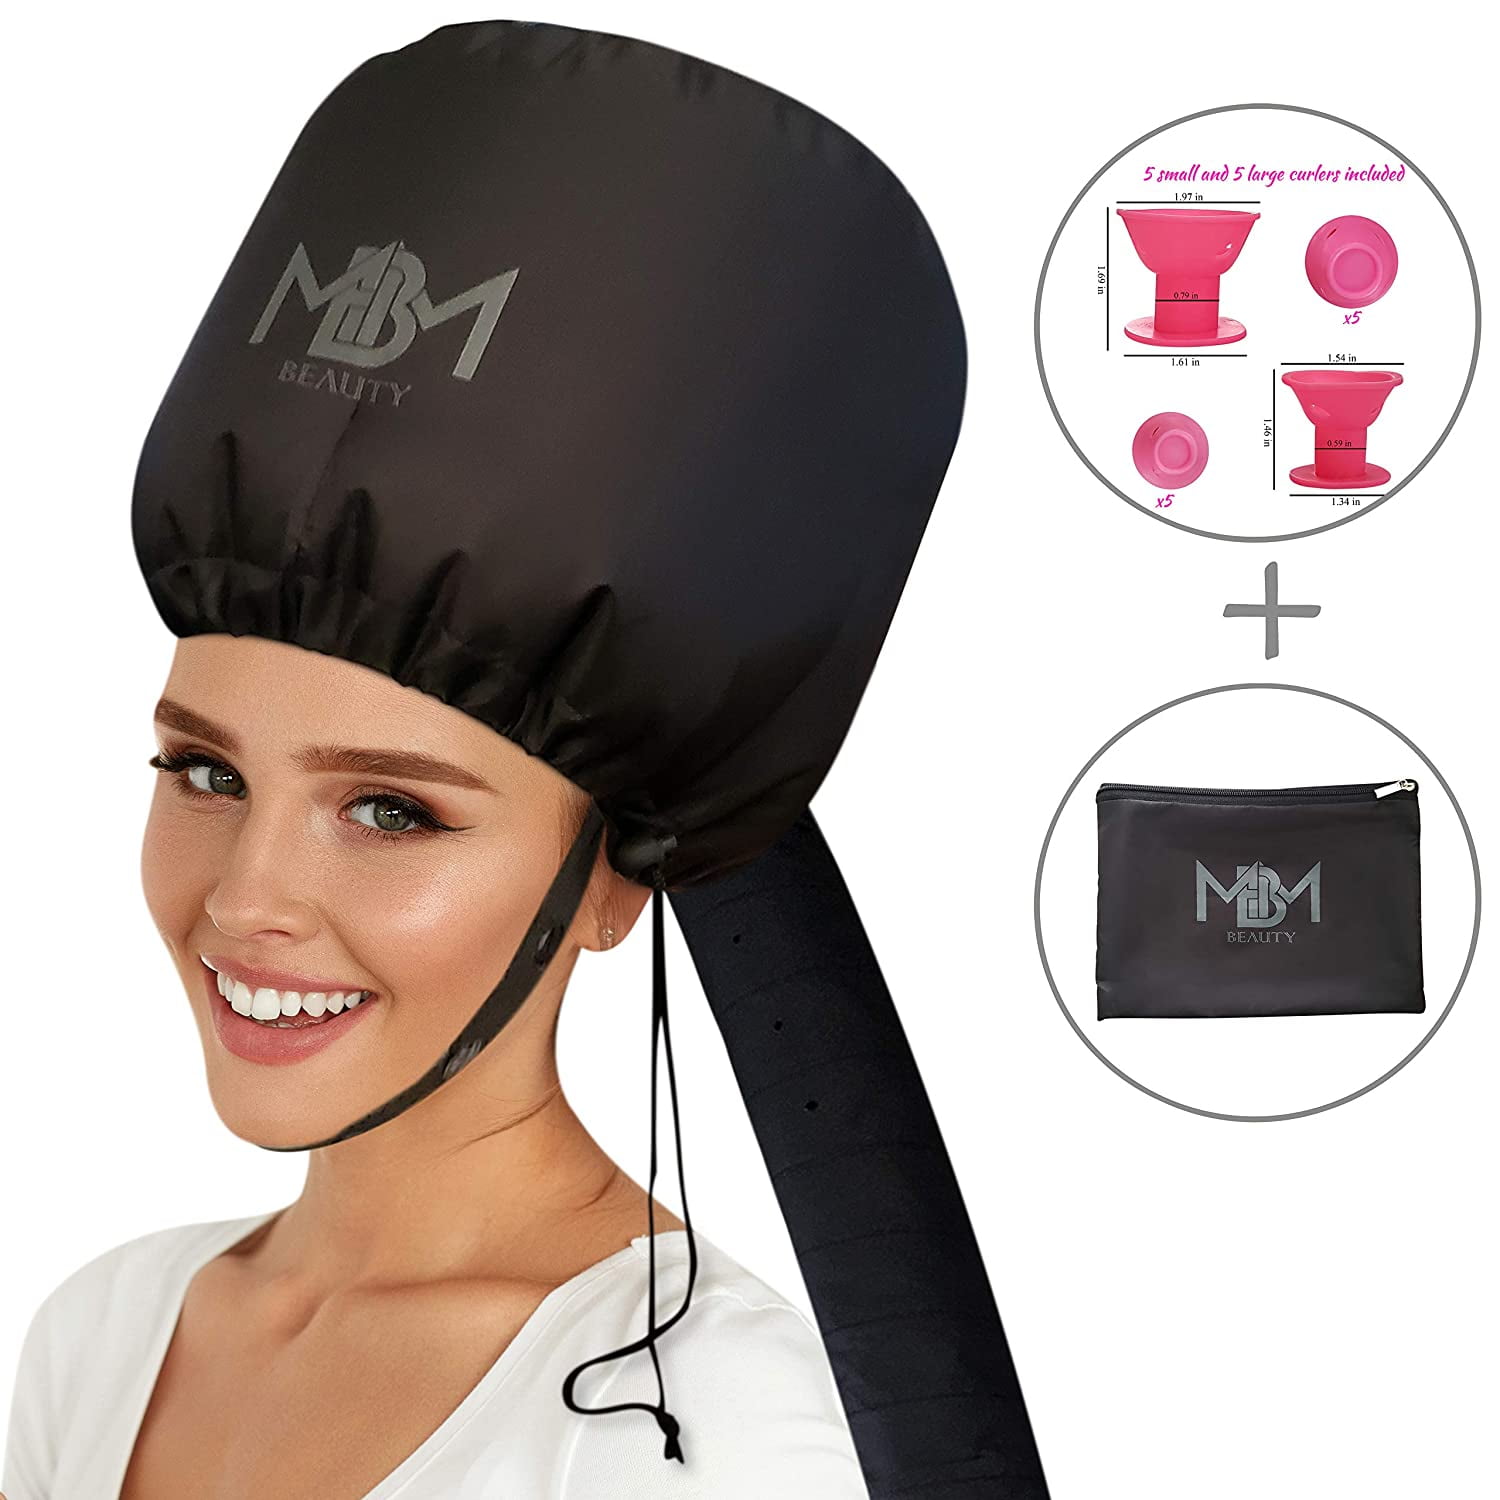 Bonnet Hair Dryer Attachment-W/ 10 Silicone Hair Curlers-Extra Large  Adjustable Soft Hooded Hair Dryer Bonnet With Extra Long Hose For Drying,Styling,Curling&Deep  Conditioning Fits All Head&Hair Sizes 